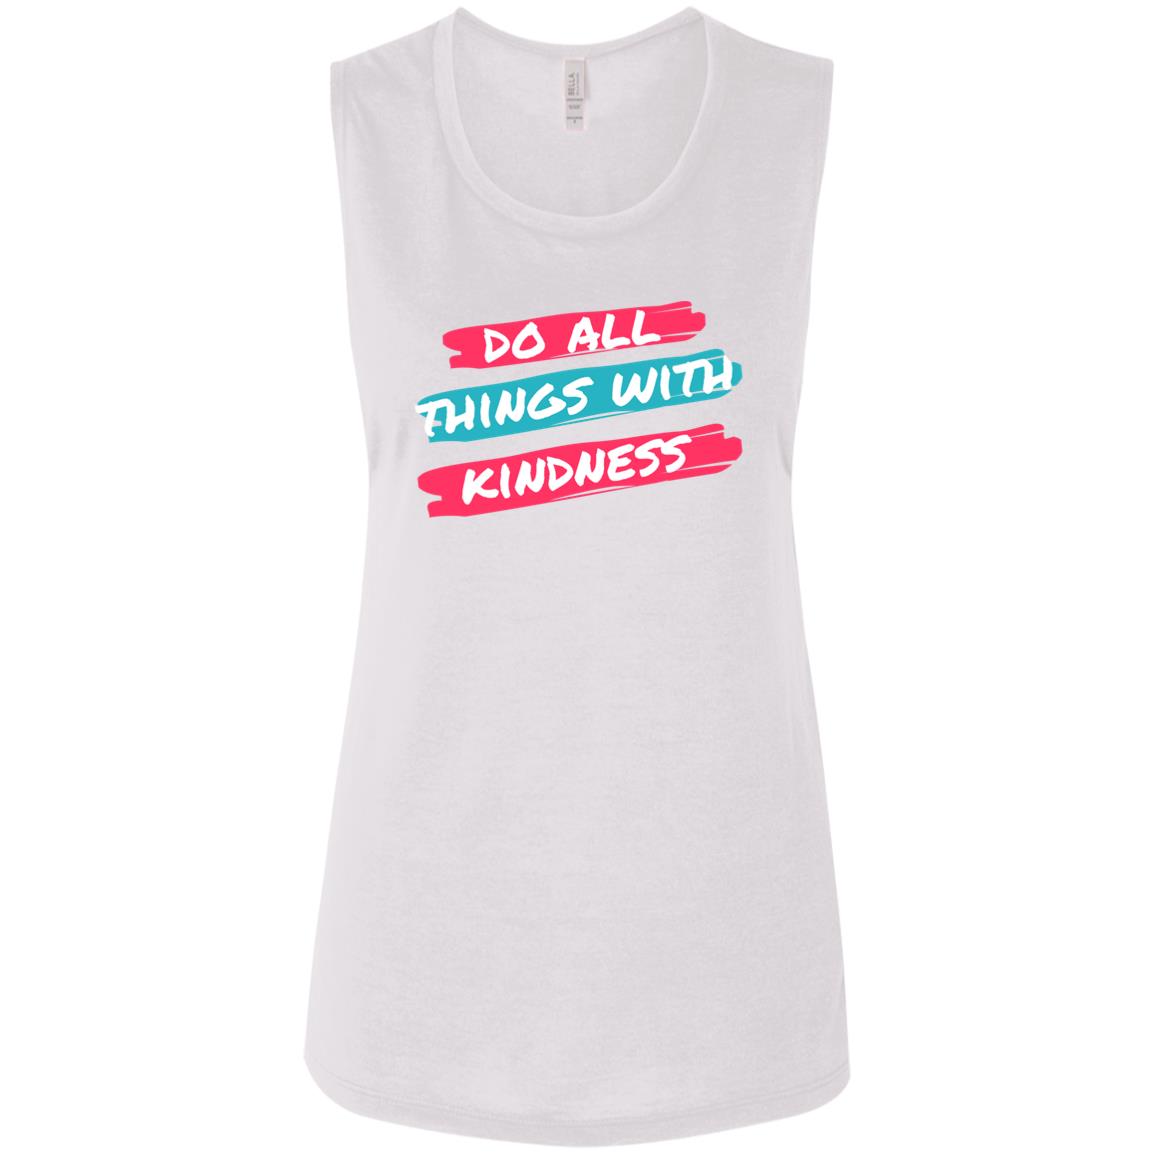 Ladies' Flowy Muscle Tank- Do all things with kindness